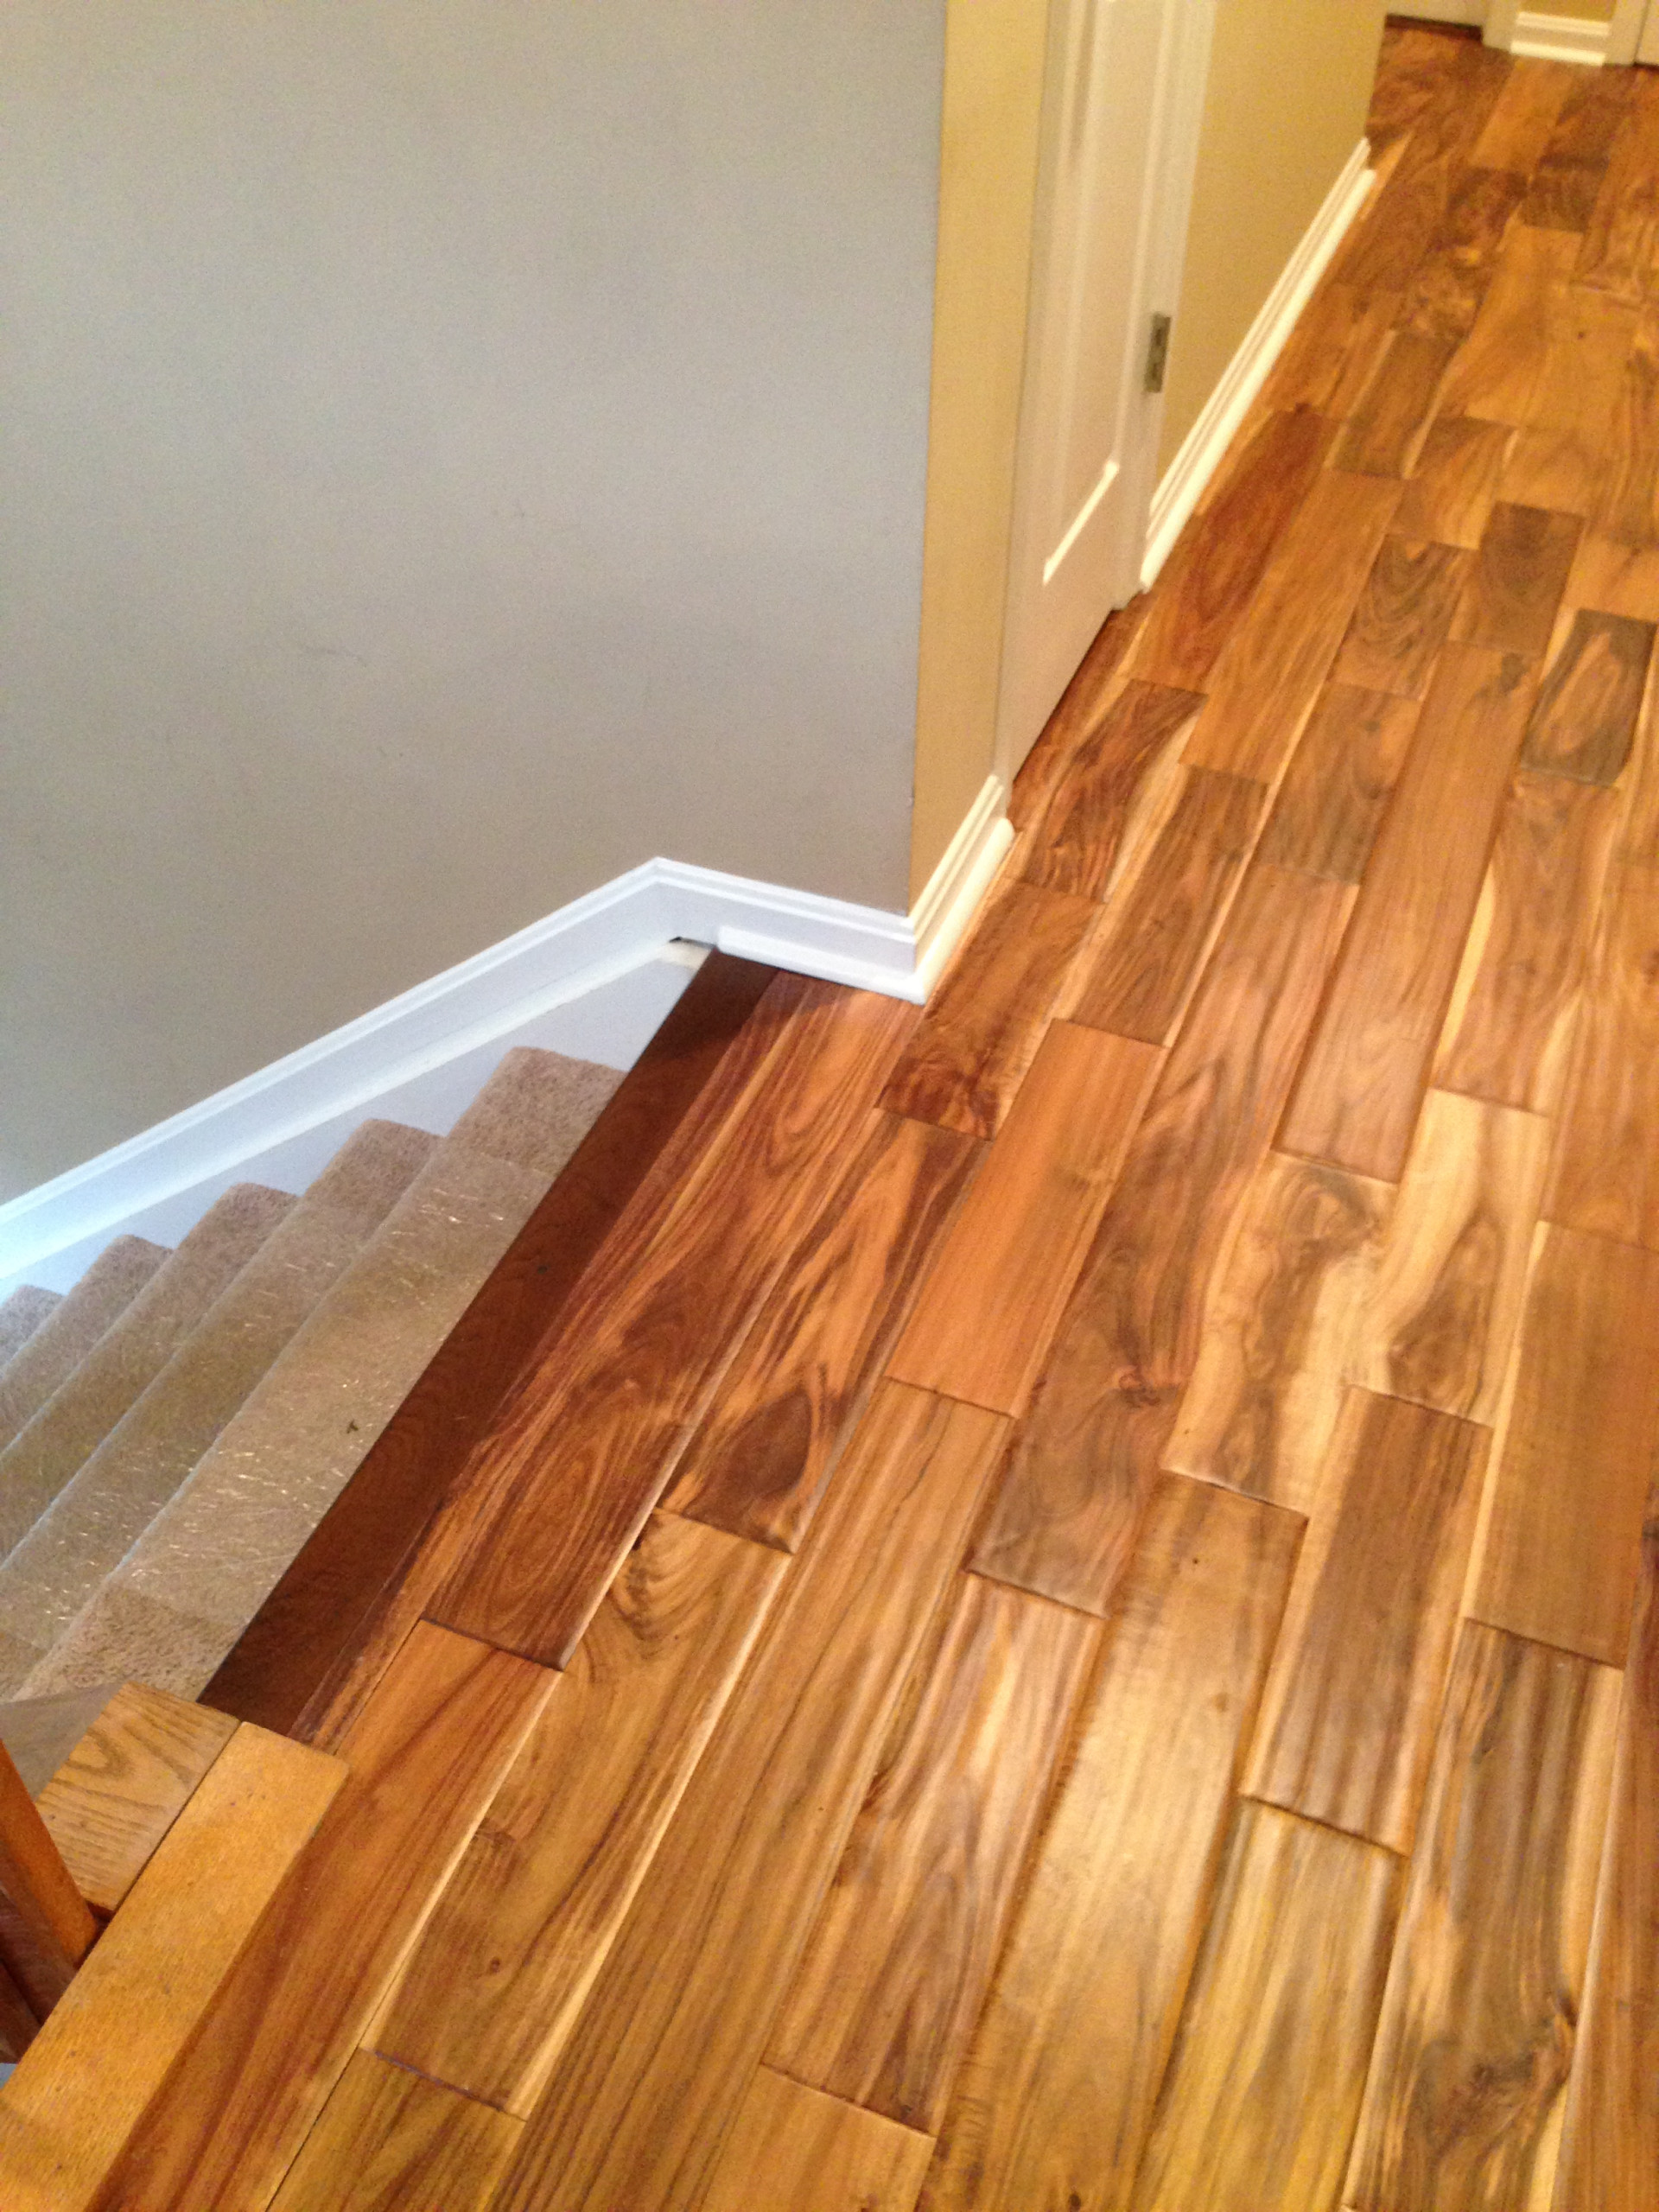 Annapolis Kitchen Remodel and Hardwood Flooring Project